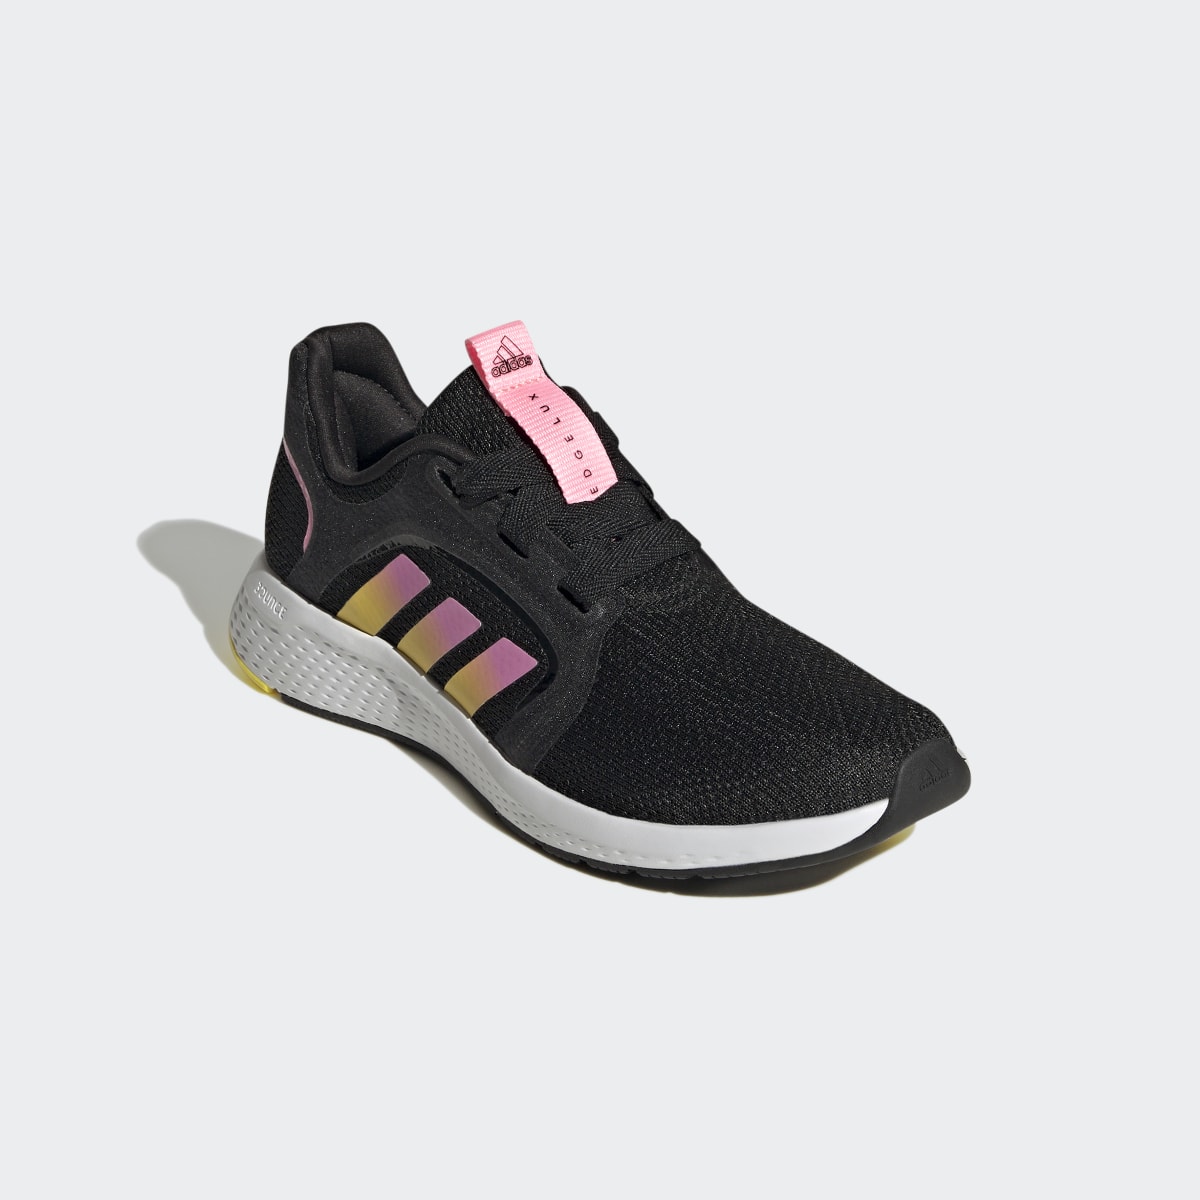 Adidas Edge Lux Shoes. 5